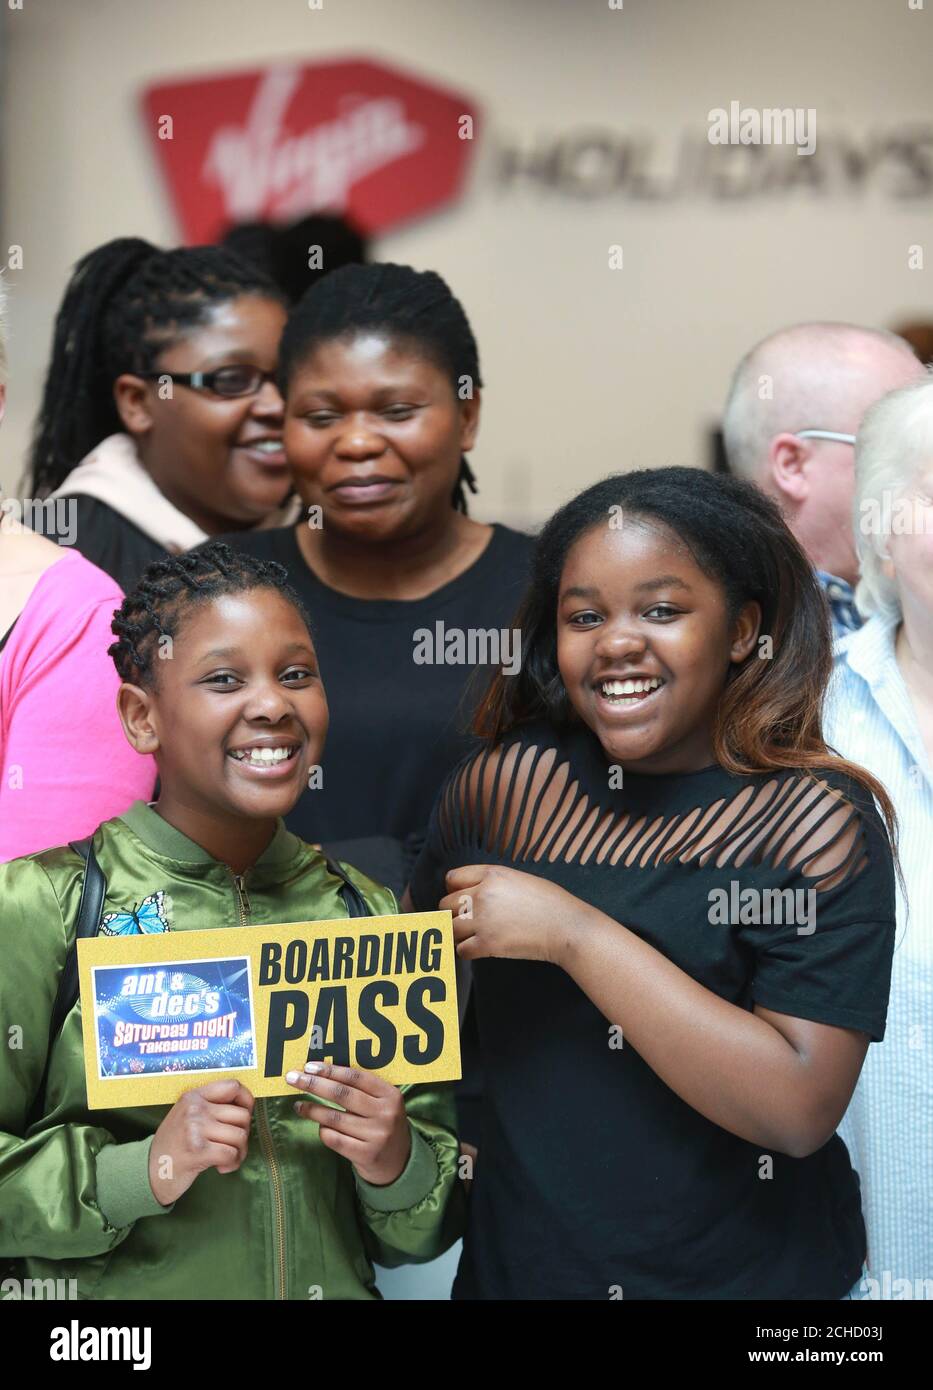 Eva Bandama, aged 9 (left) and Janice Jinks, aged 12, from Luton, join passengers celebrating before boarding a Virgin Holidays airplane, courtesy of ITV's Saturday Night Takeaway, departing for Universal Orlando Resort in Florida, at Gatwick Airport in West Sussex. Stock Photo